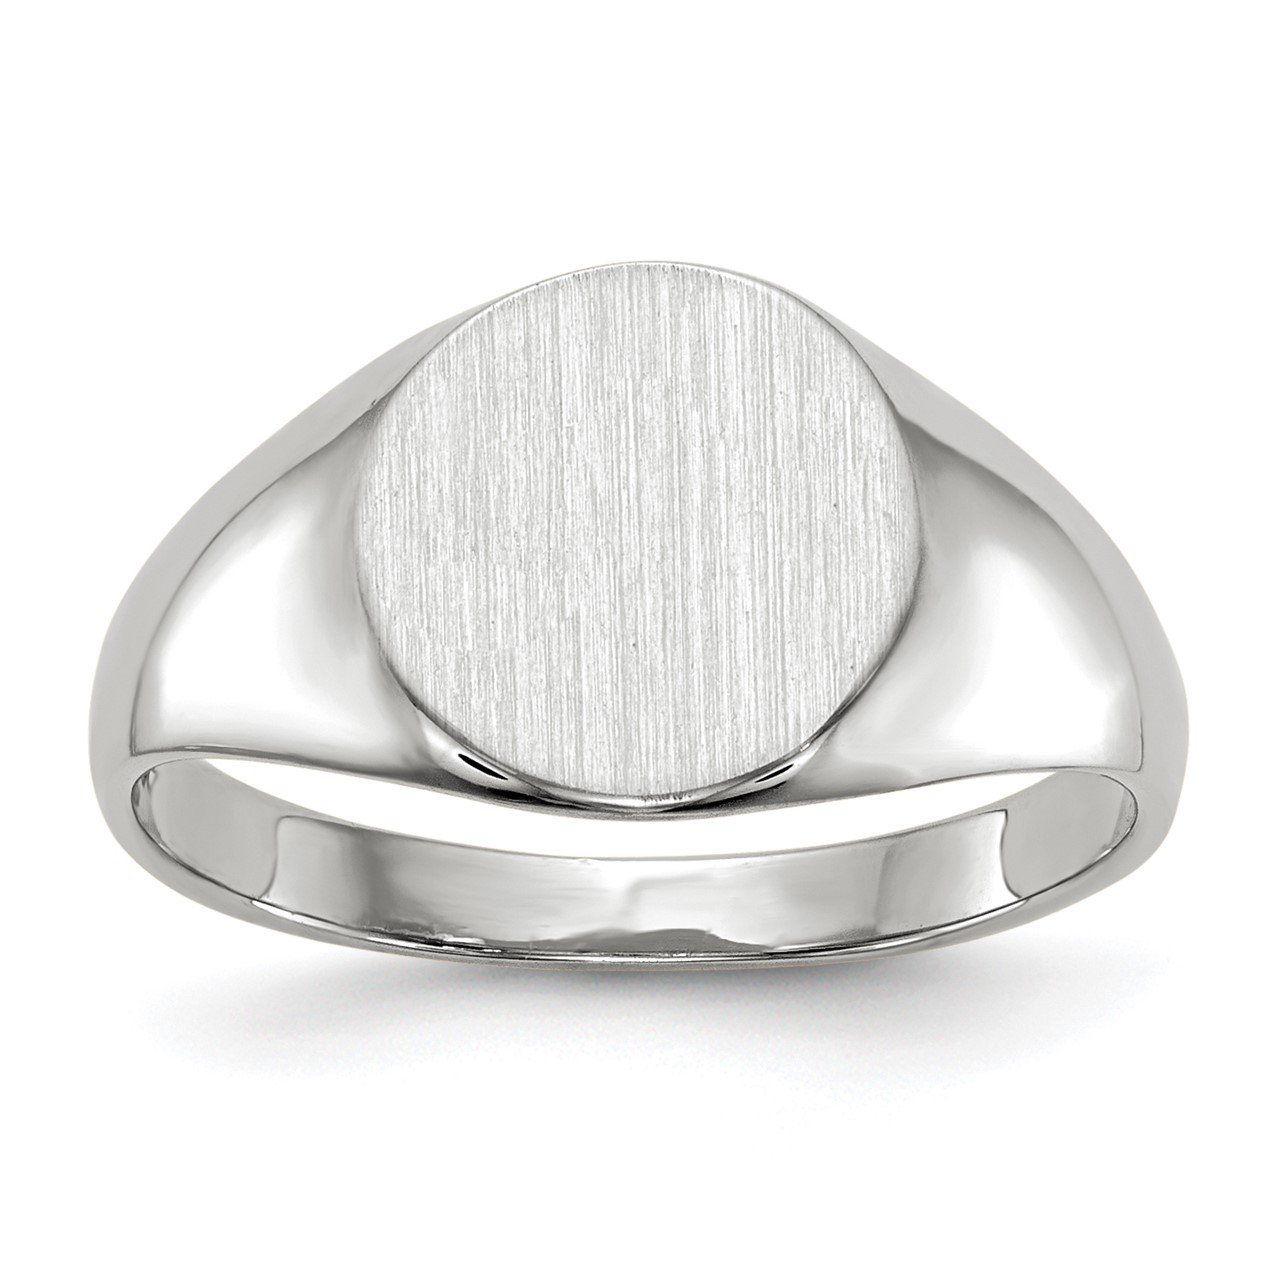 14kw 9.0x9.5mm Closed Back Signet Ring